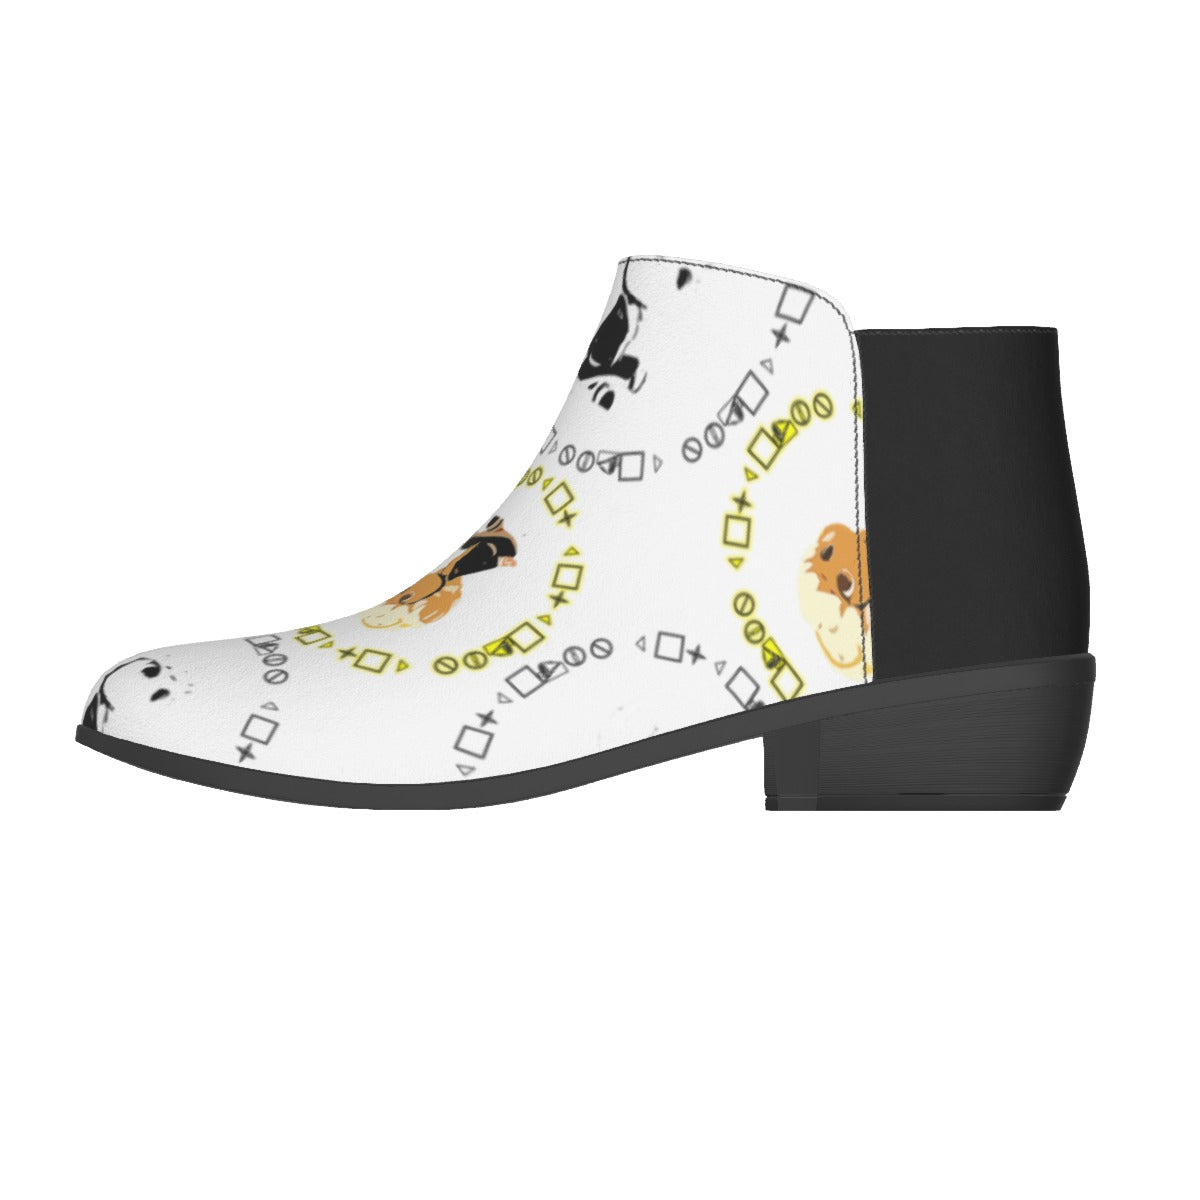 Branded Pattern Men's Fashion Boots